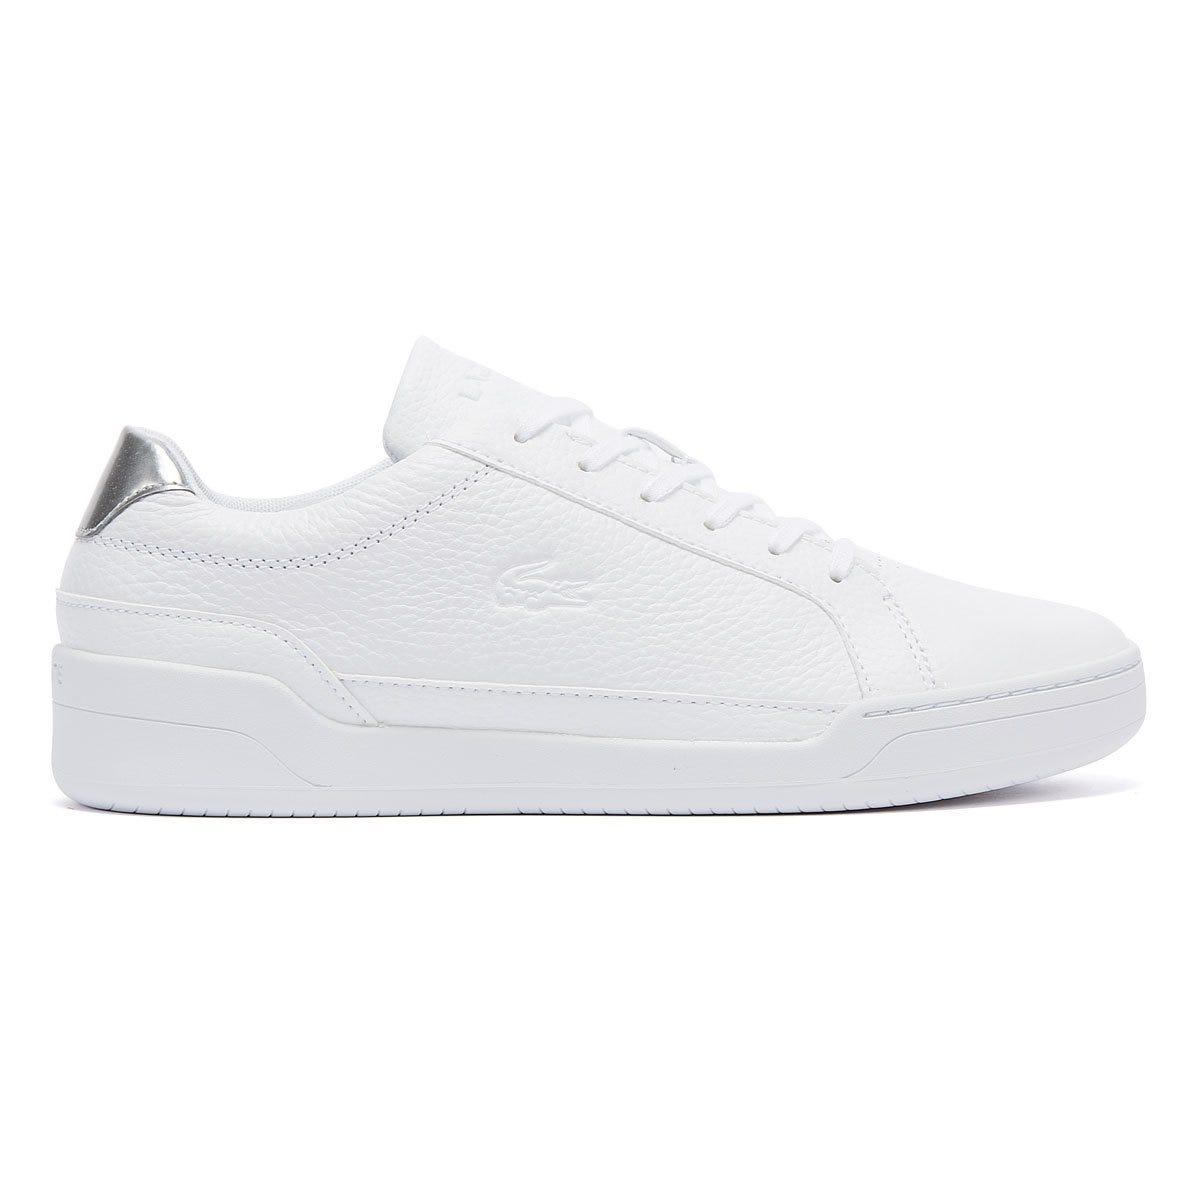 Lacoste Leather Challenge 120 4 Womens White / Silver Trainers - Lyst